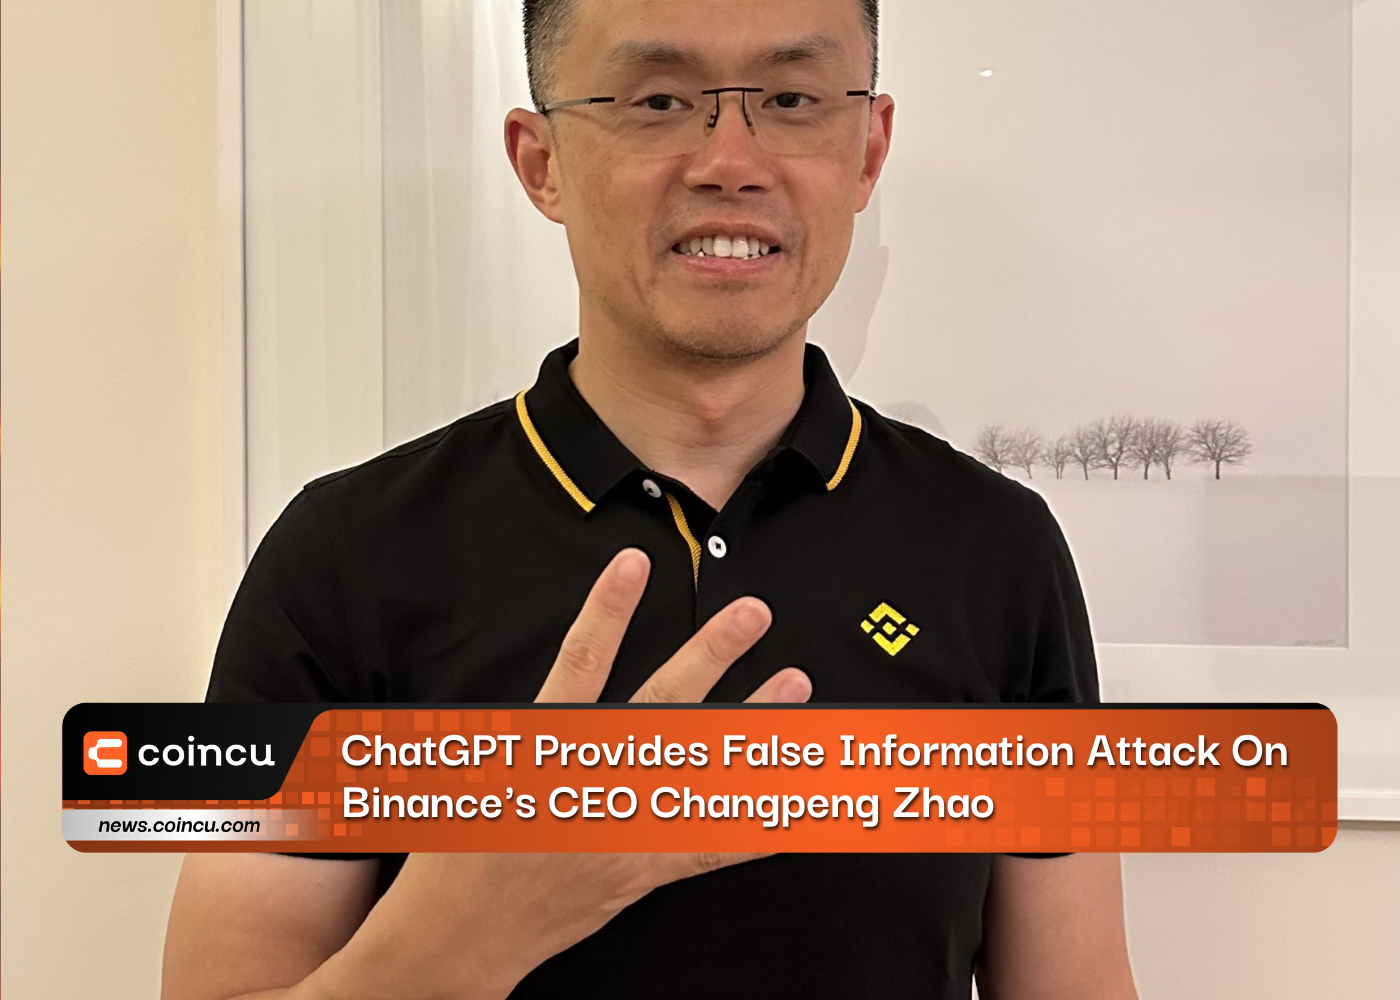 ChatGPT Provides False Information Attack On Binance's CEO Changpeng Zhao